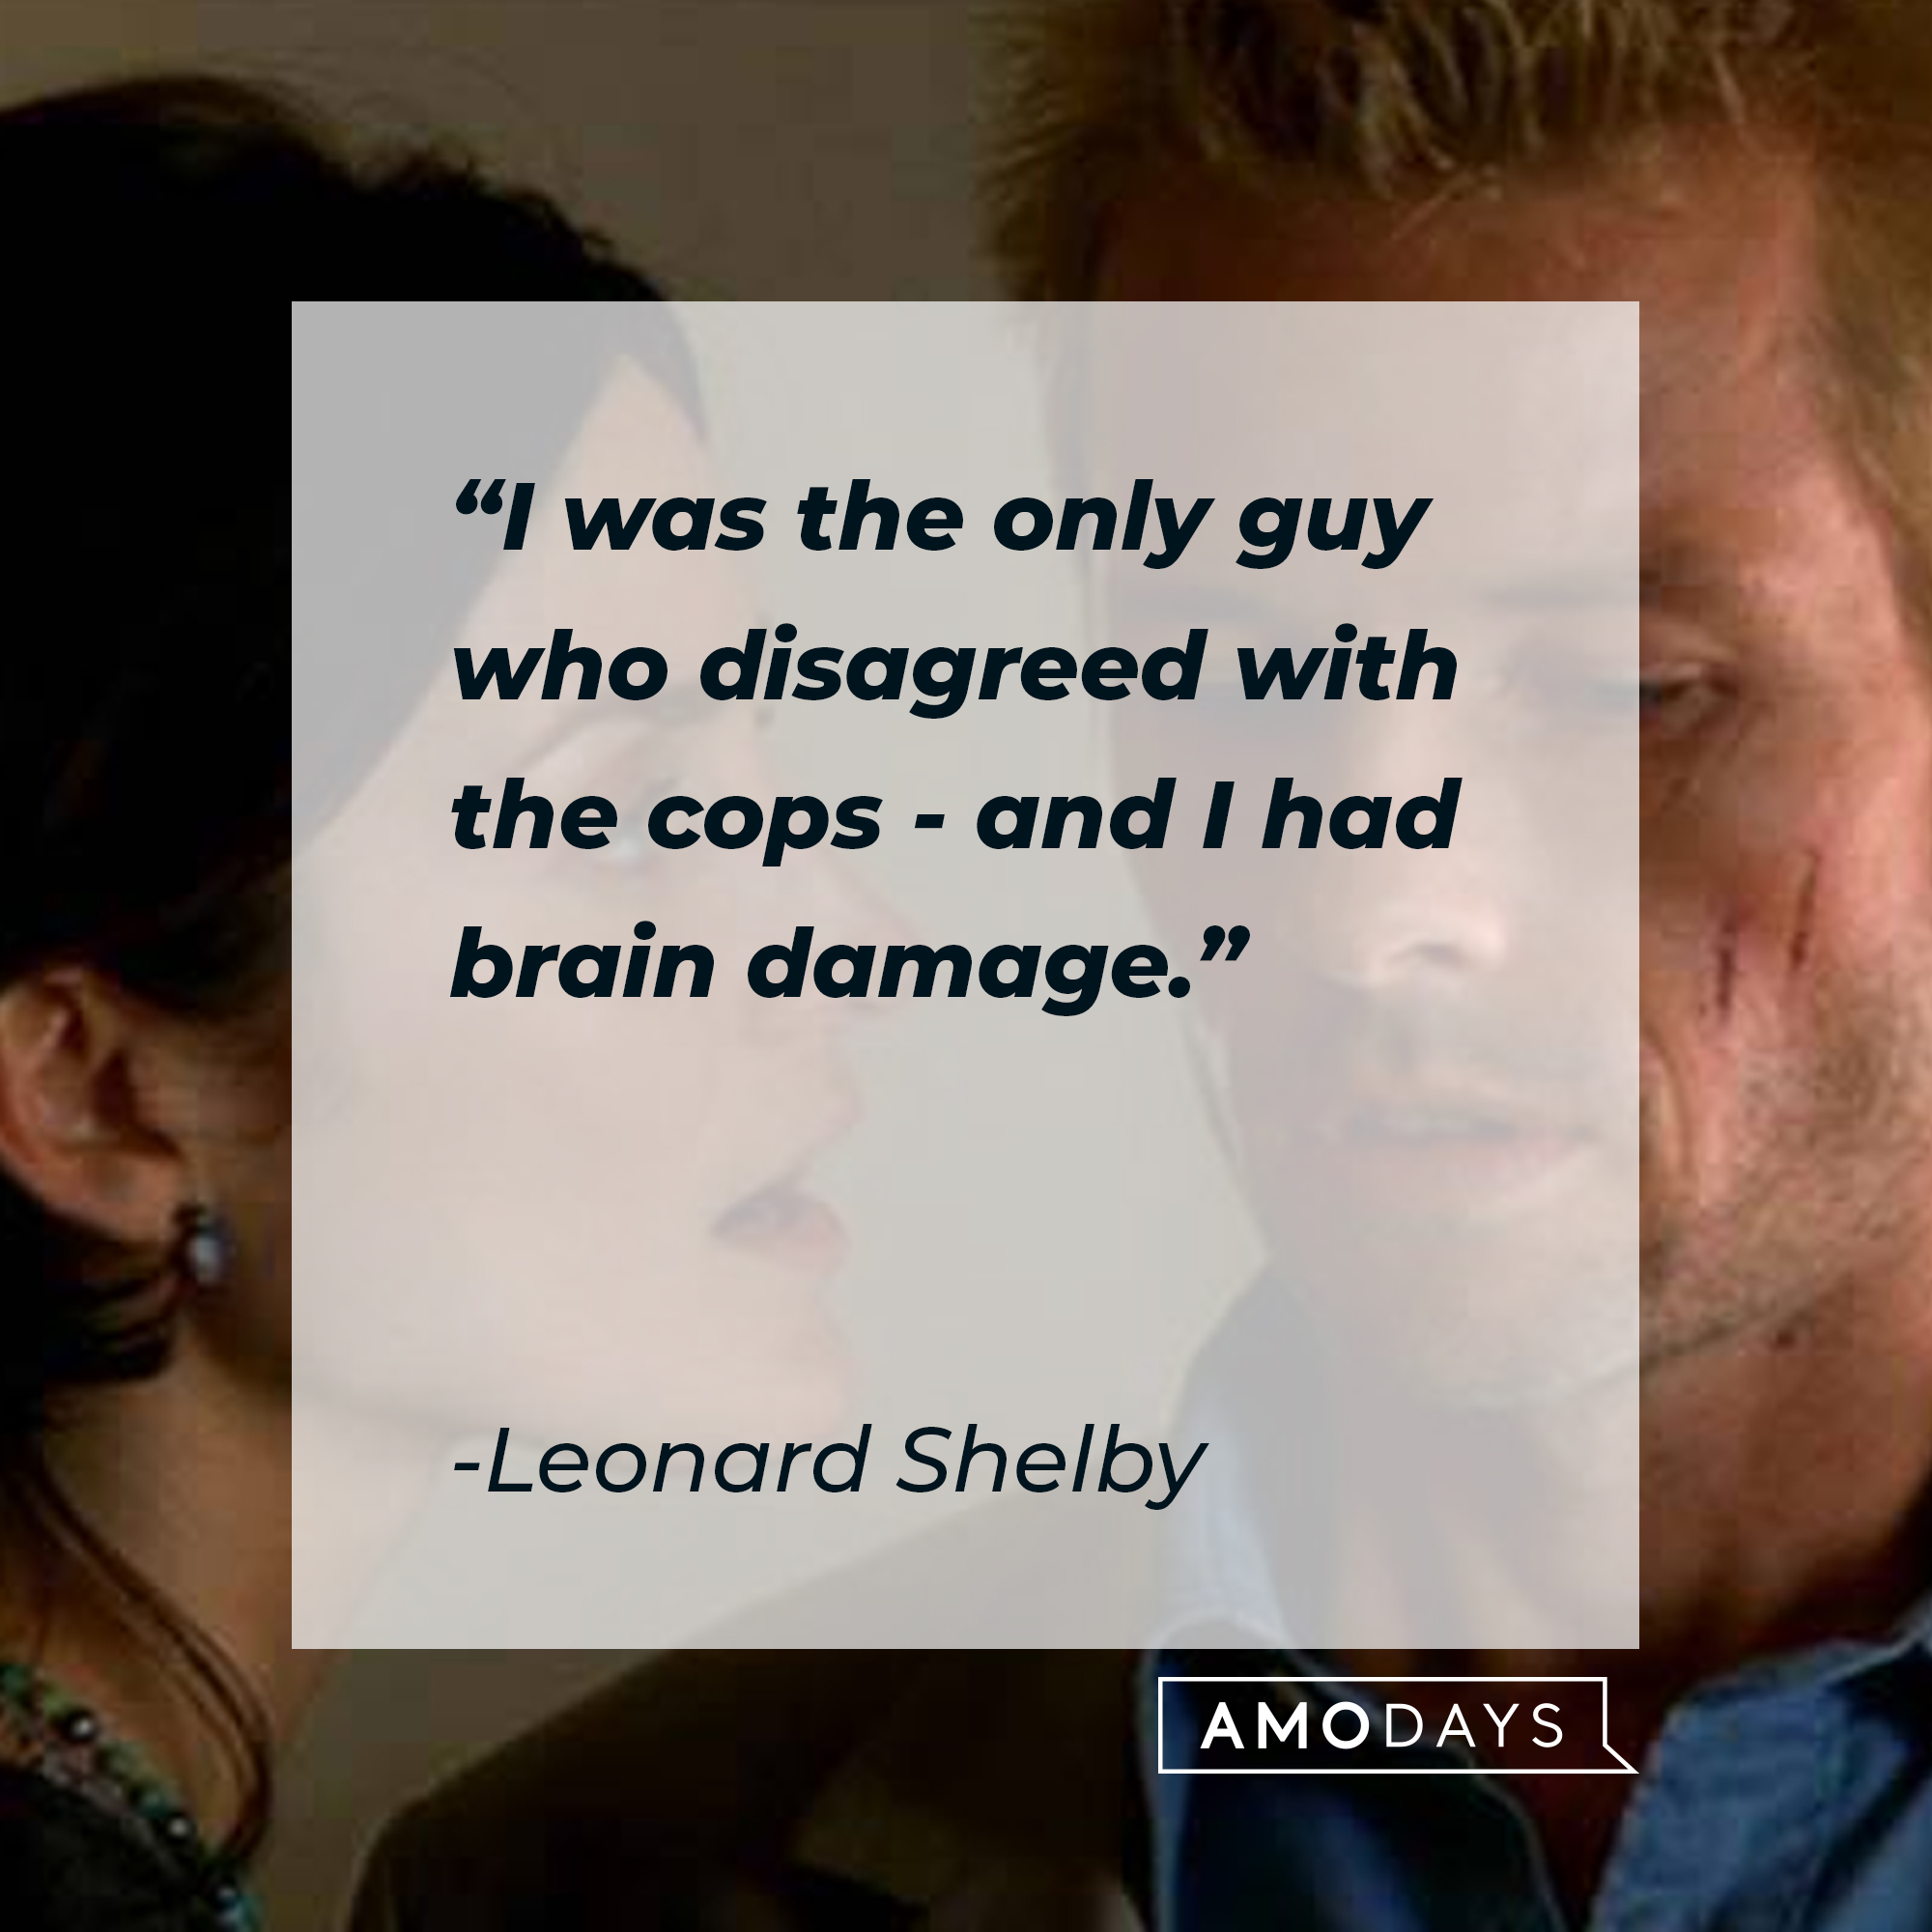 Leonard Shelby's quote: "I was the only guy who disagreed with the cops - and I had brain damage." | Source: facebook.com/MementoOfficial